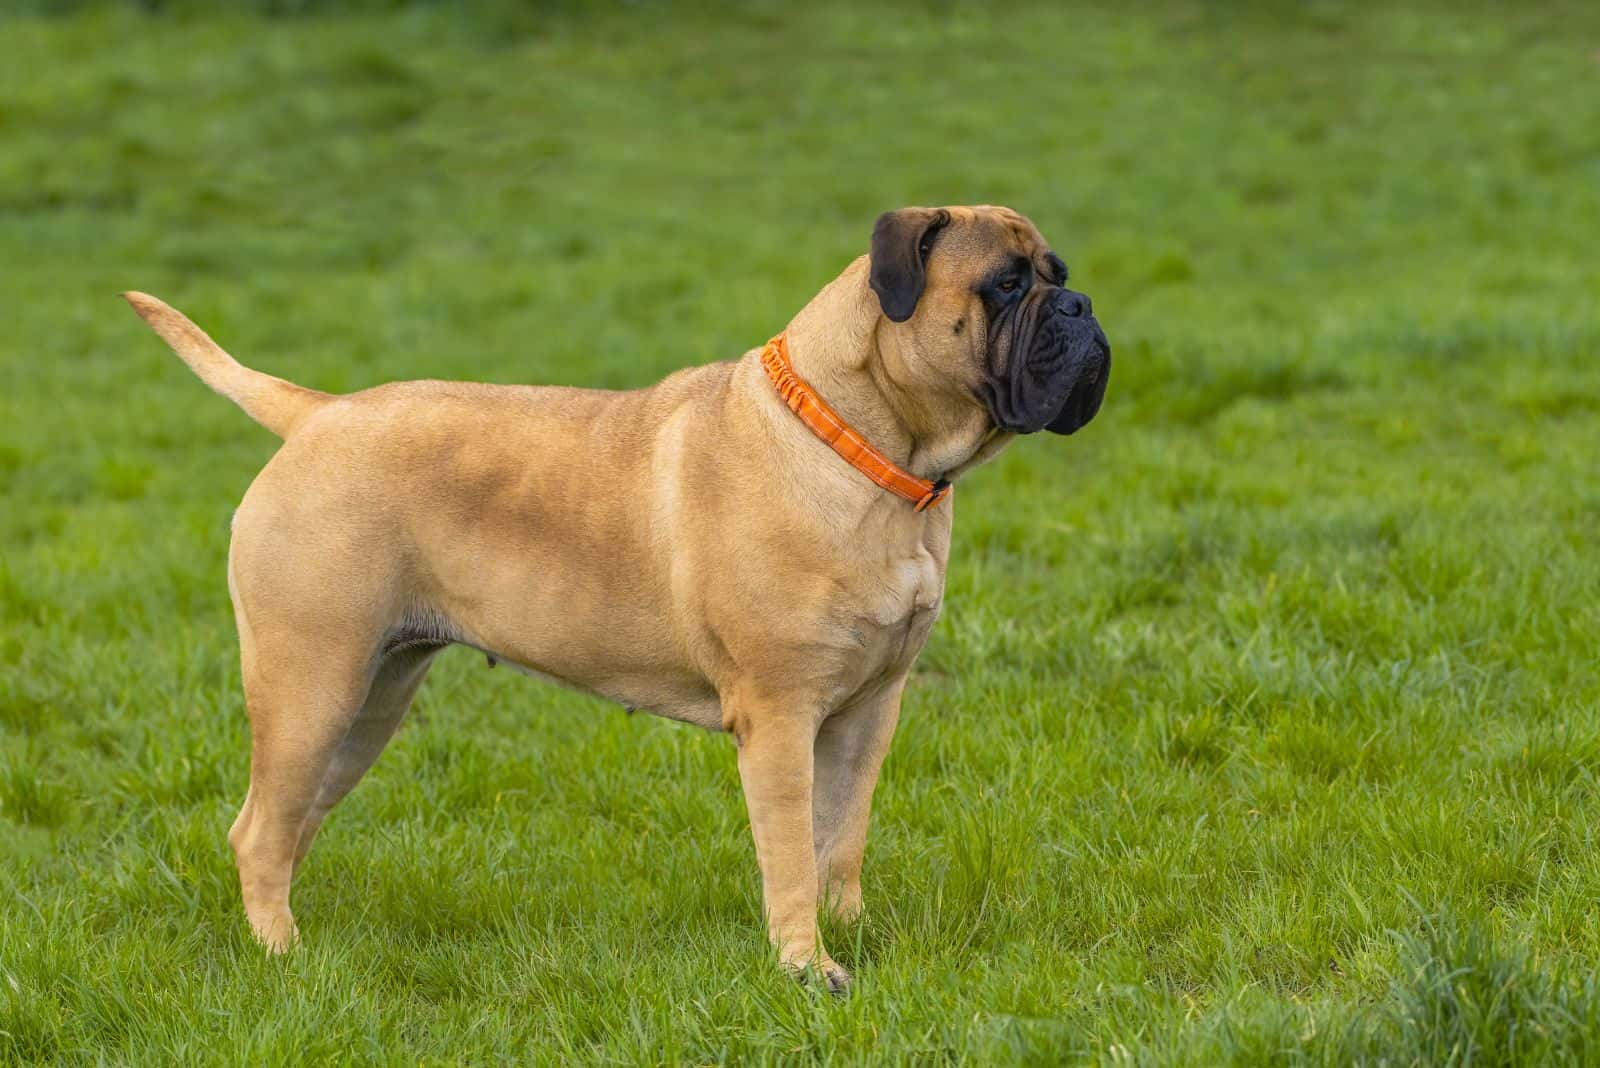 A bullmastiff is standing in a field and looking into the distance